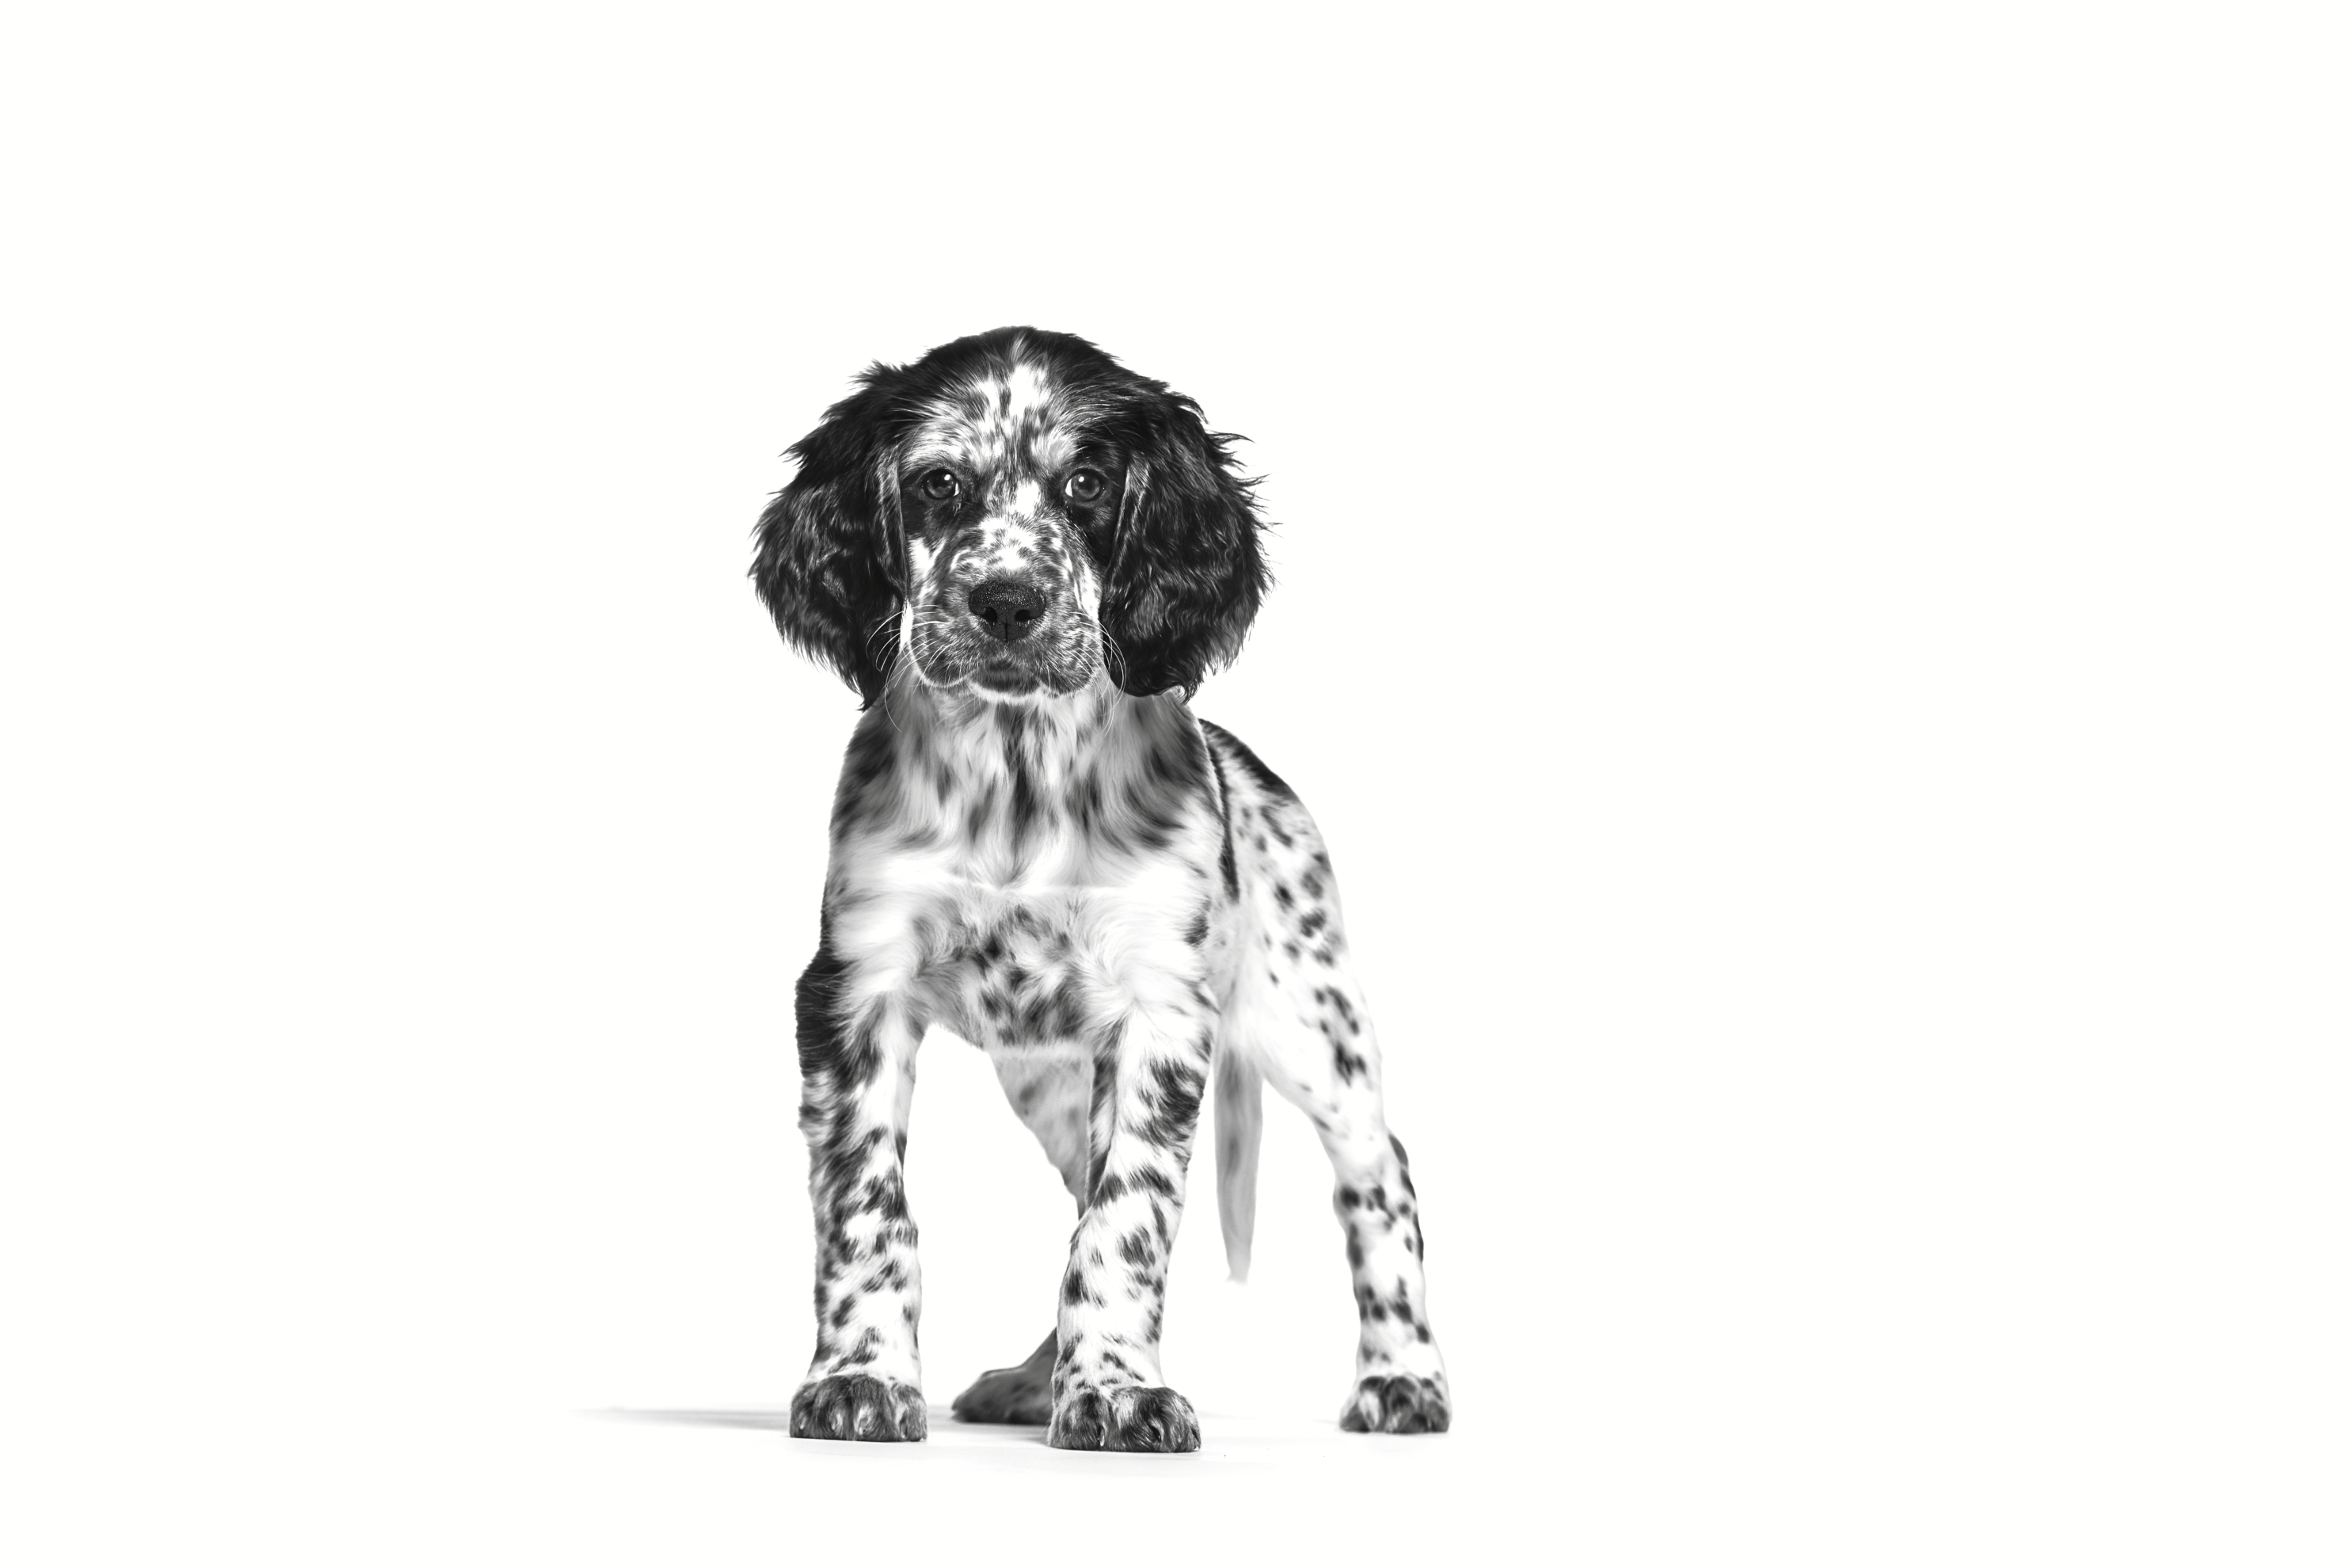 English Setter puppy standing in black and white on a white background